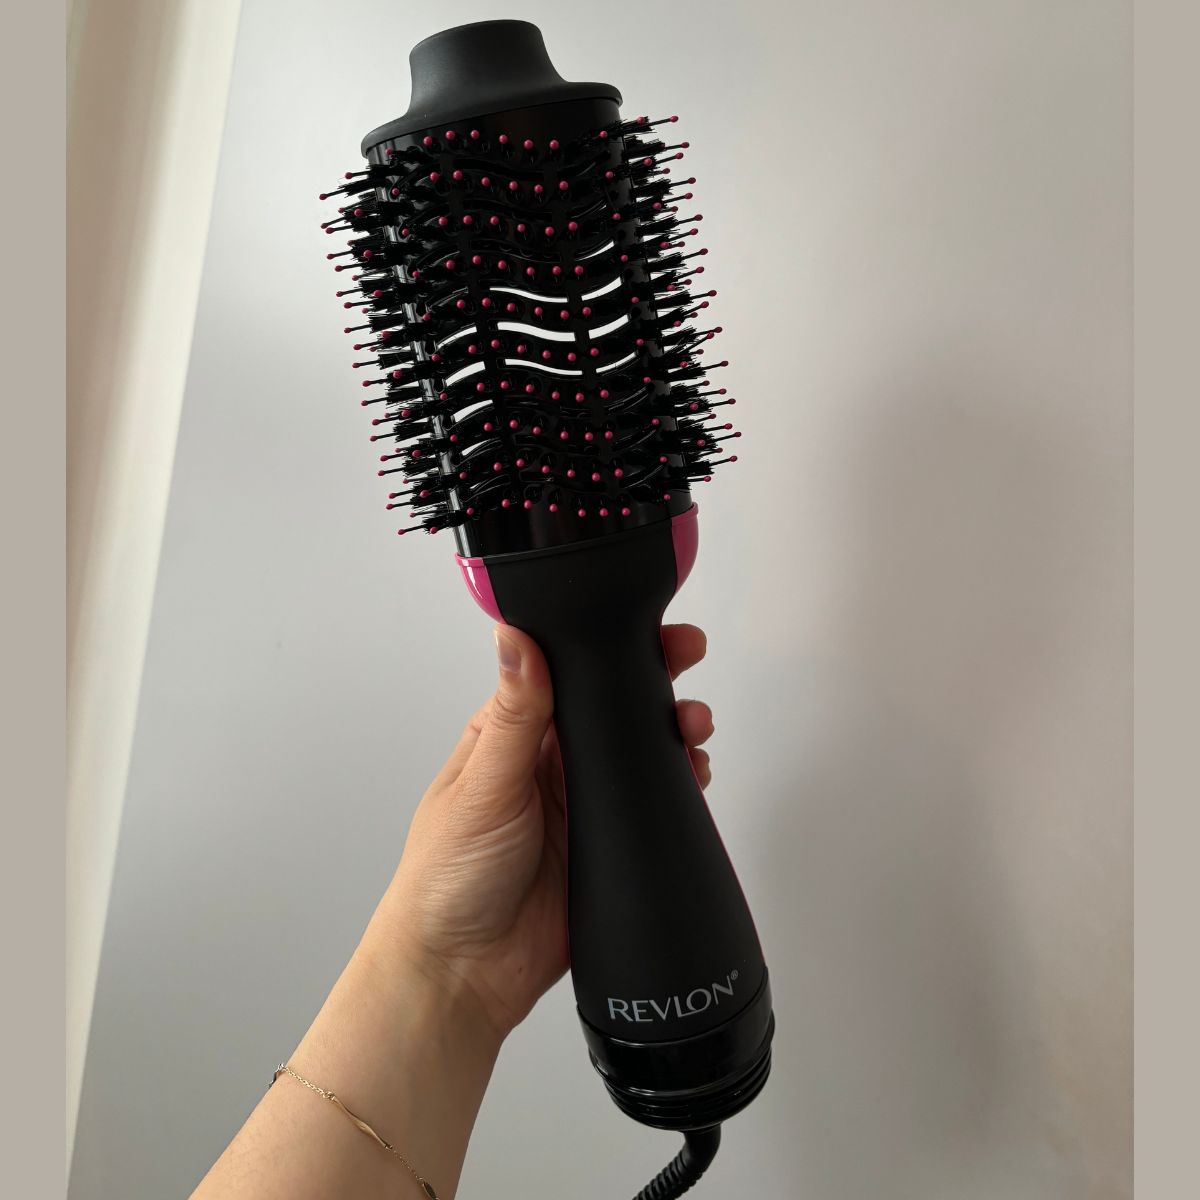  I am useless at blow drying my unruly hair, but this viral hair tool makes it so easy - and it's super affordable 